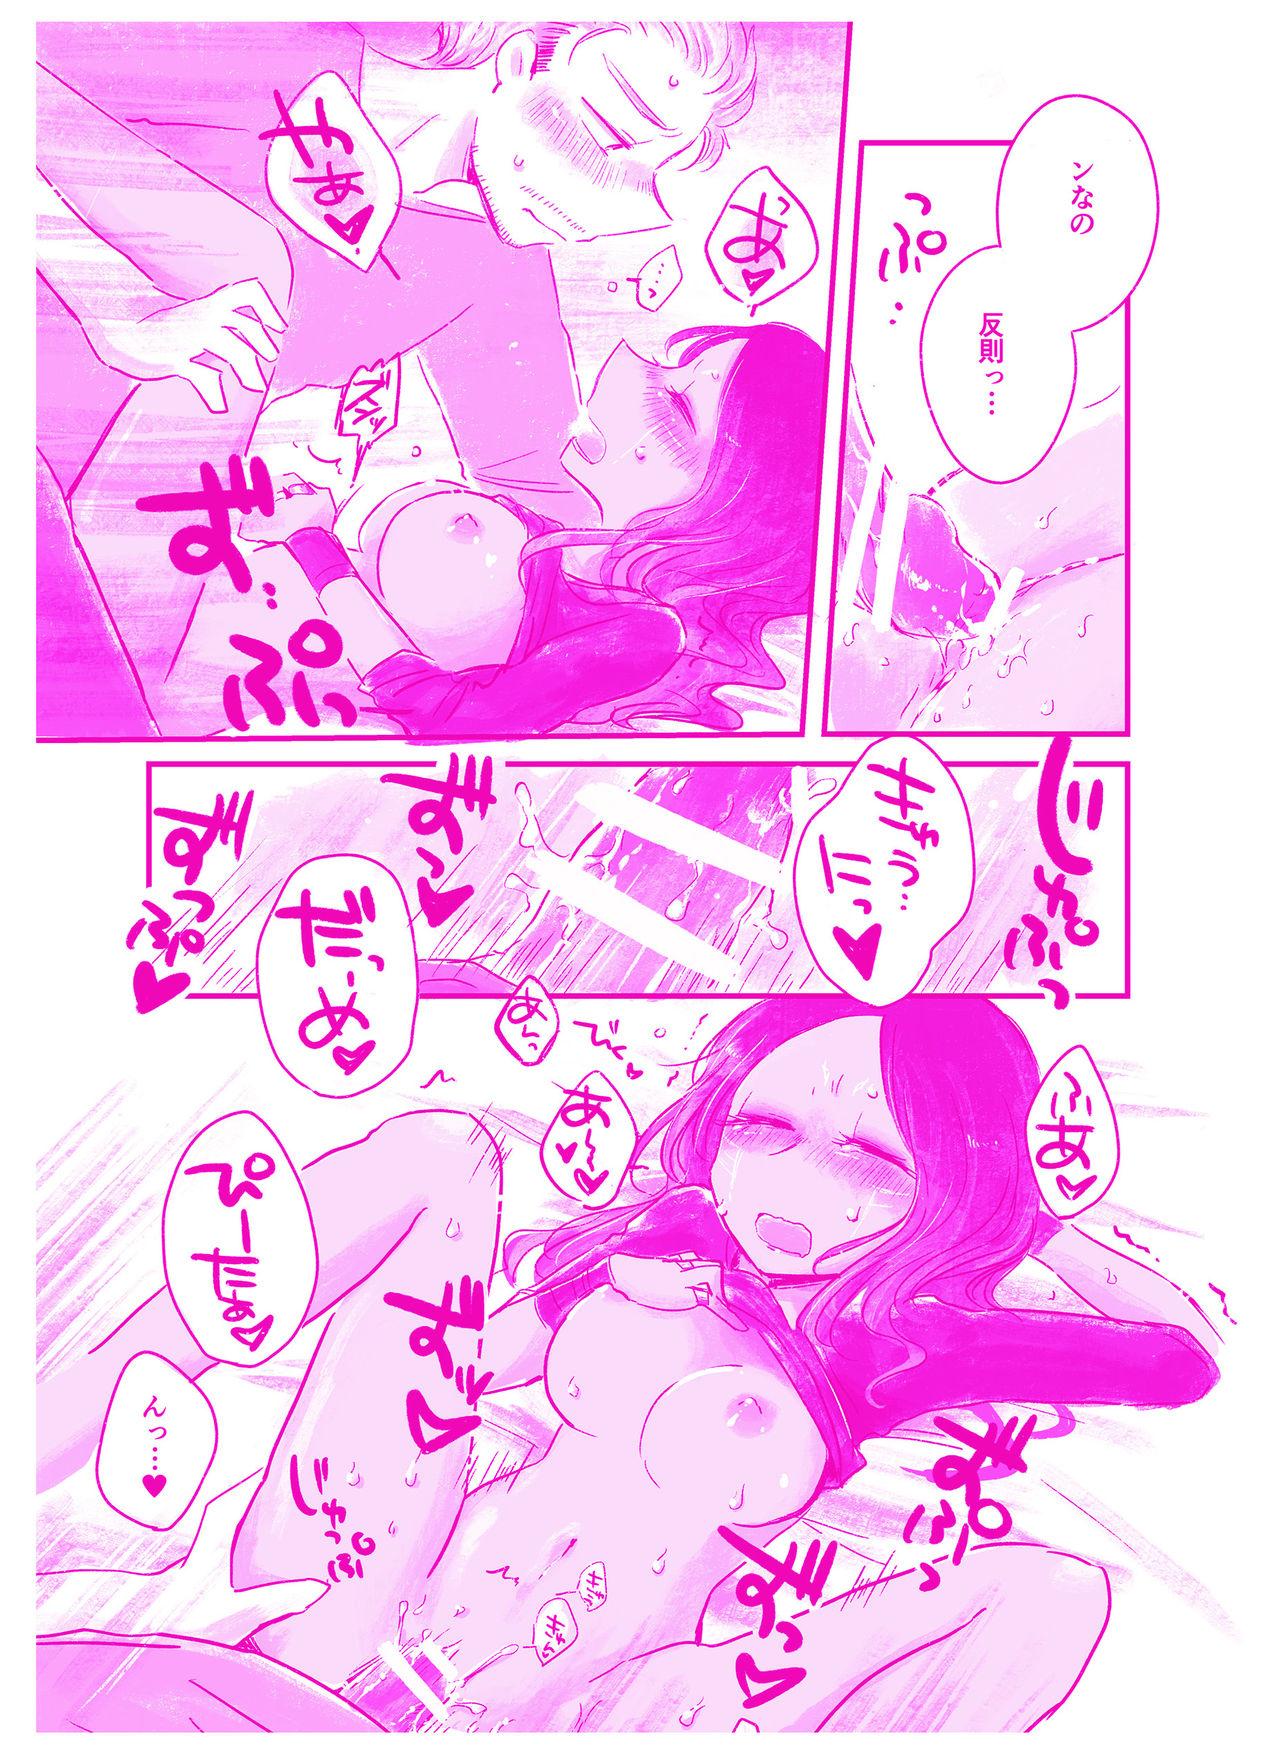 Girl 言われてみてえもんだ - Guardians of the galaxy Petite - Page 12